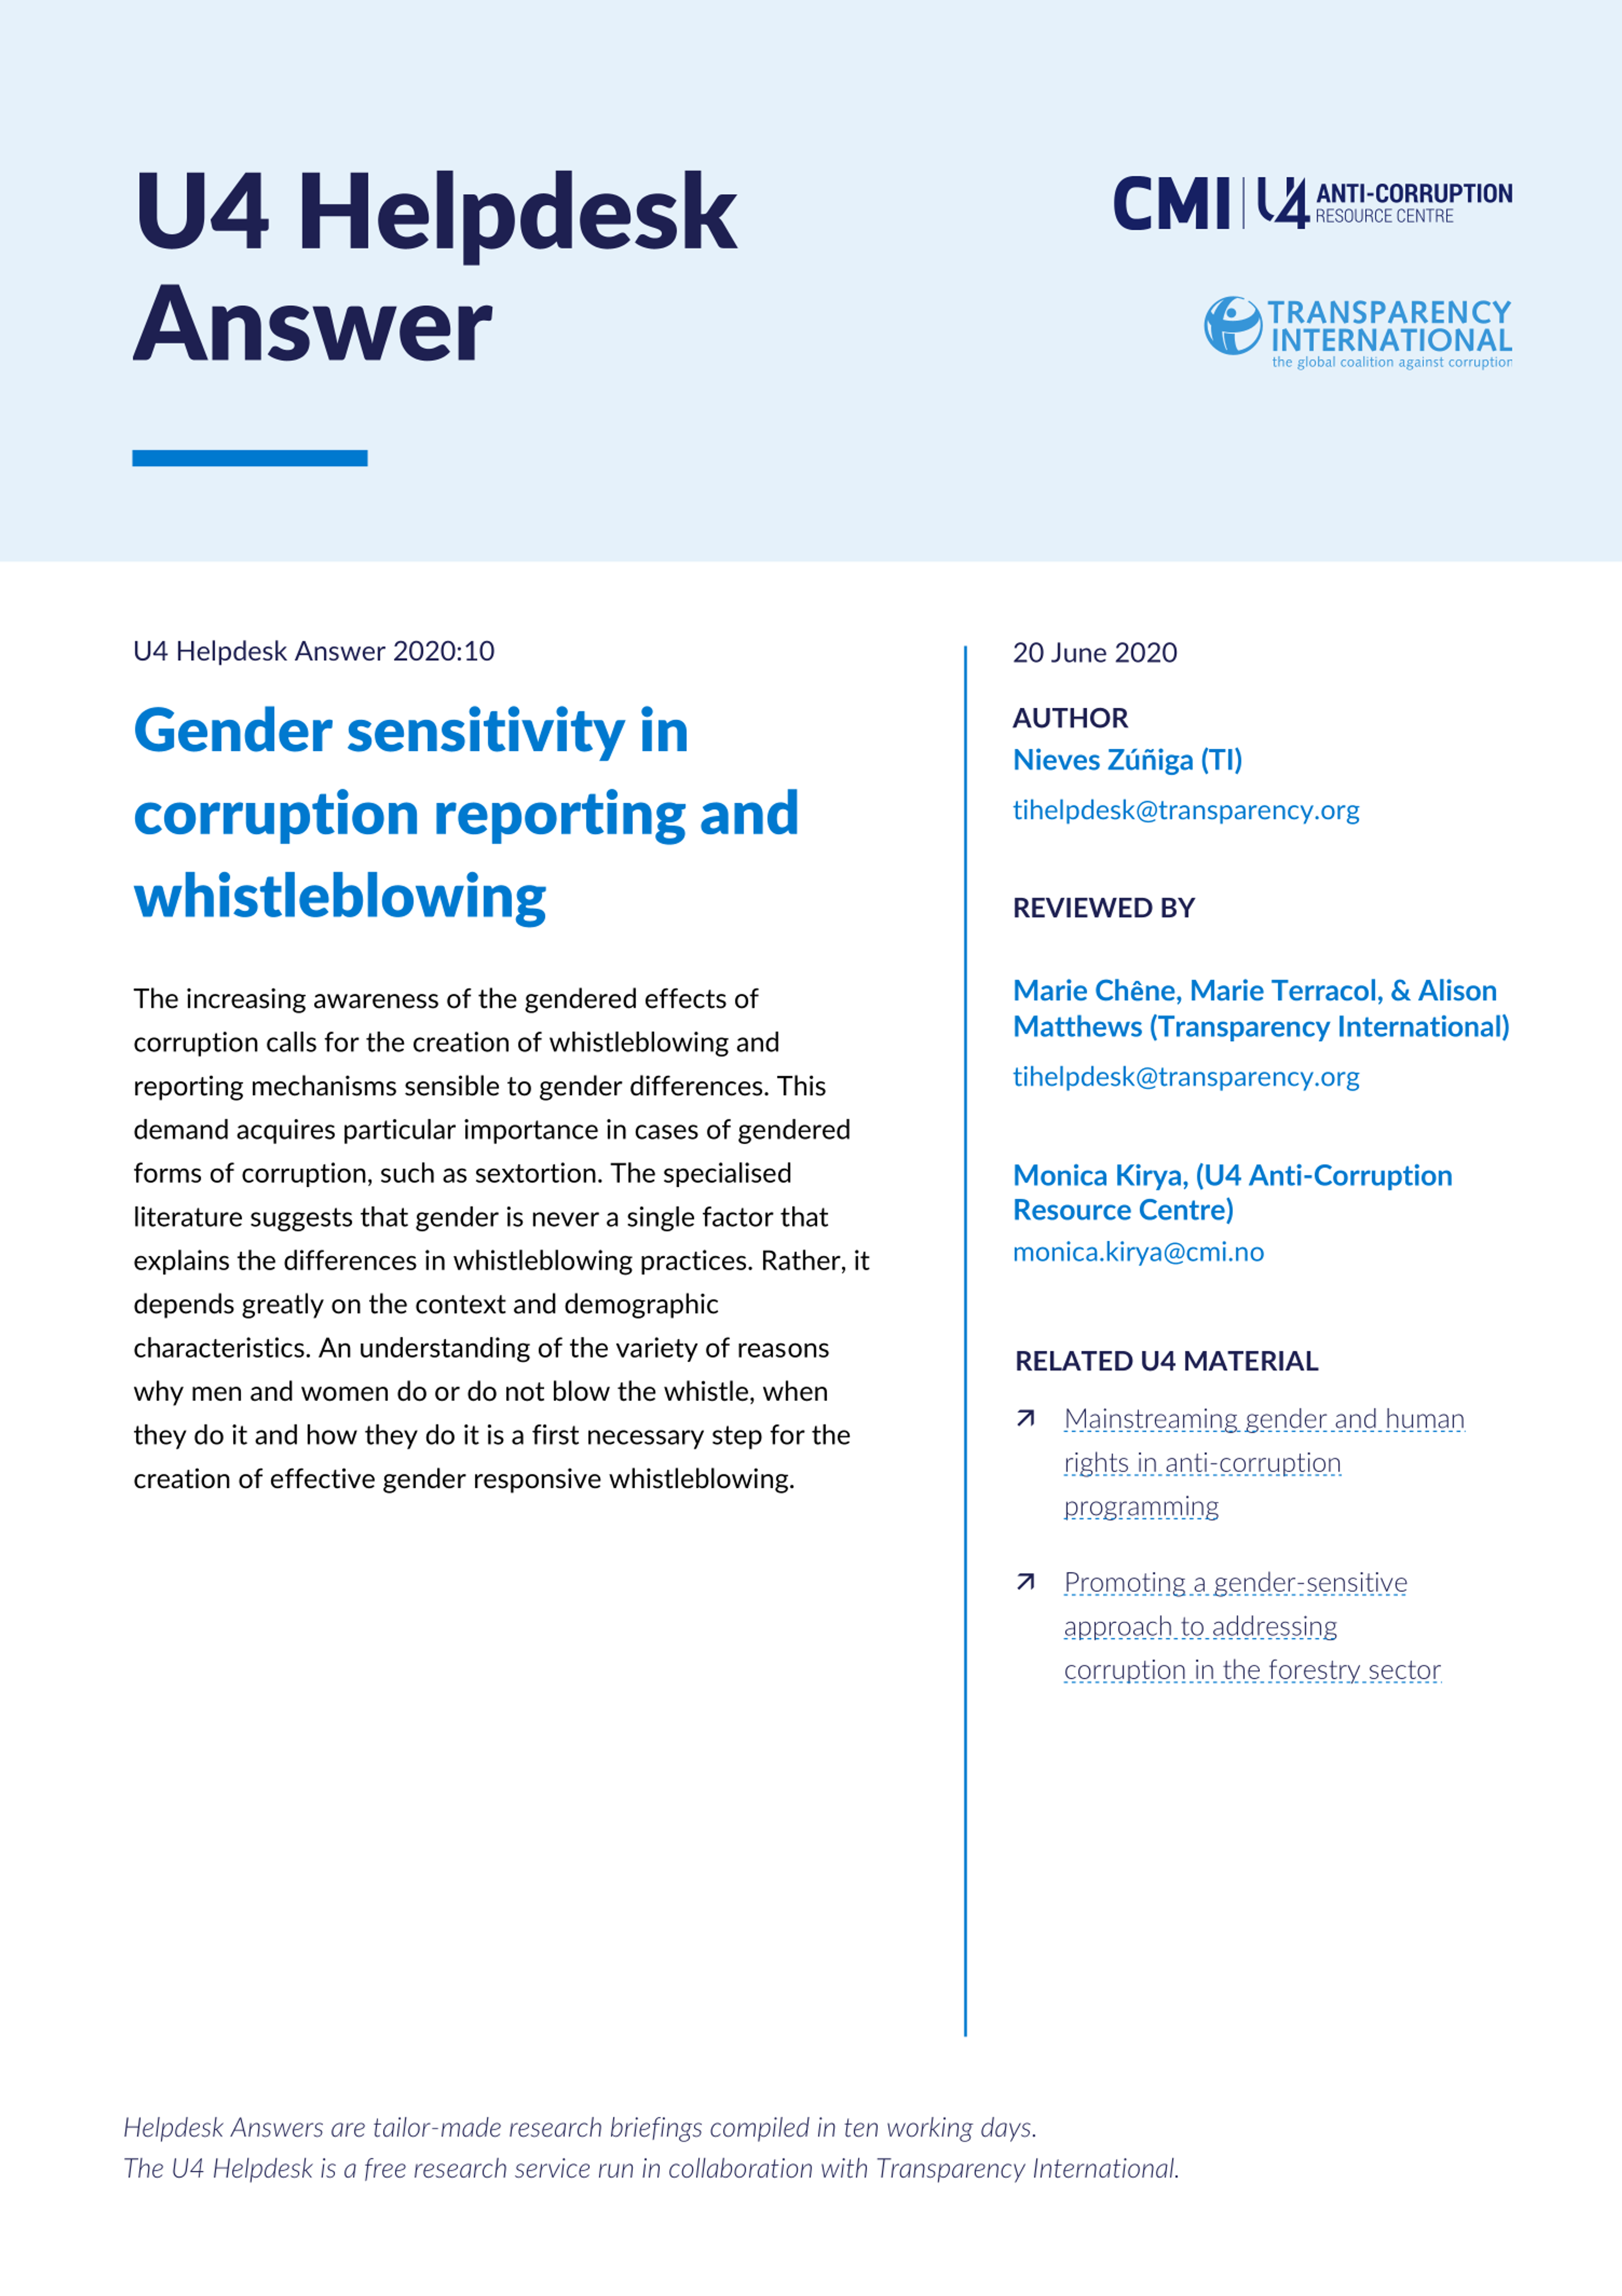 Gender sensitivity in corruption reporting and whistleblowing